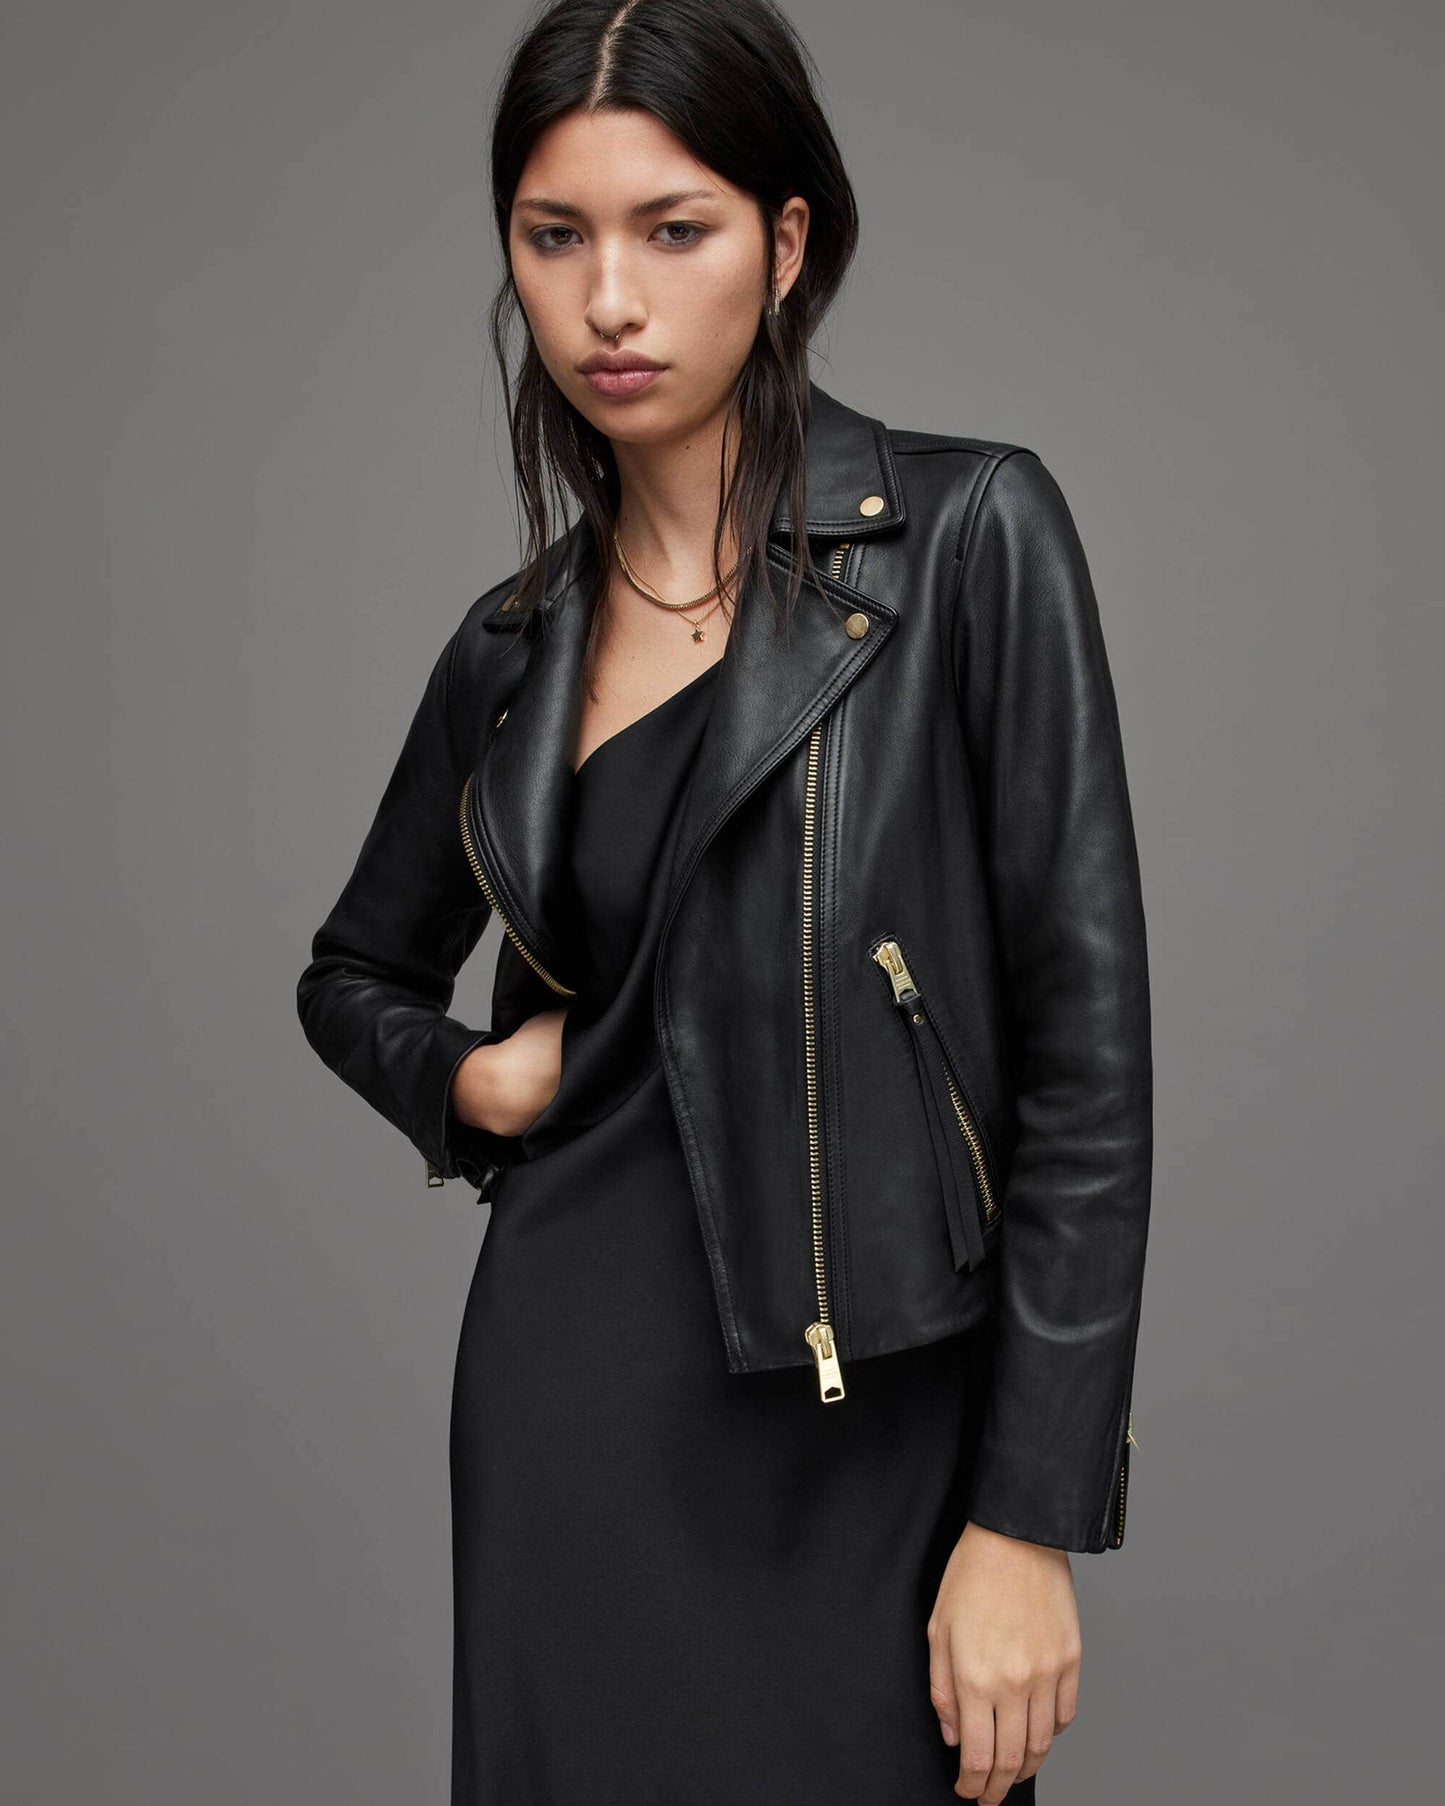 Women's Black Leather Biker Jacket With Gold Tone Zippers